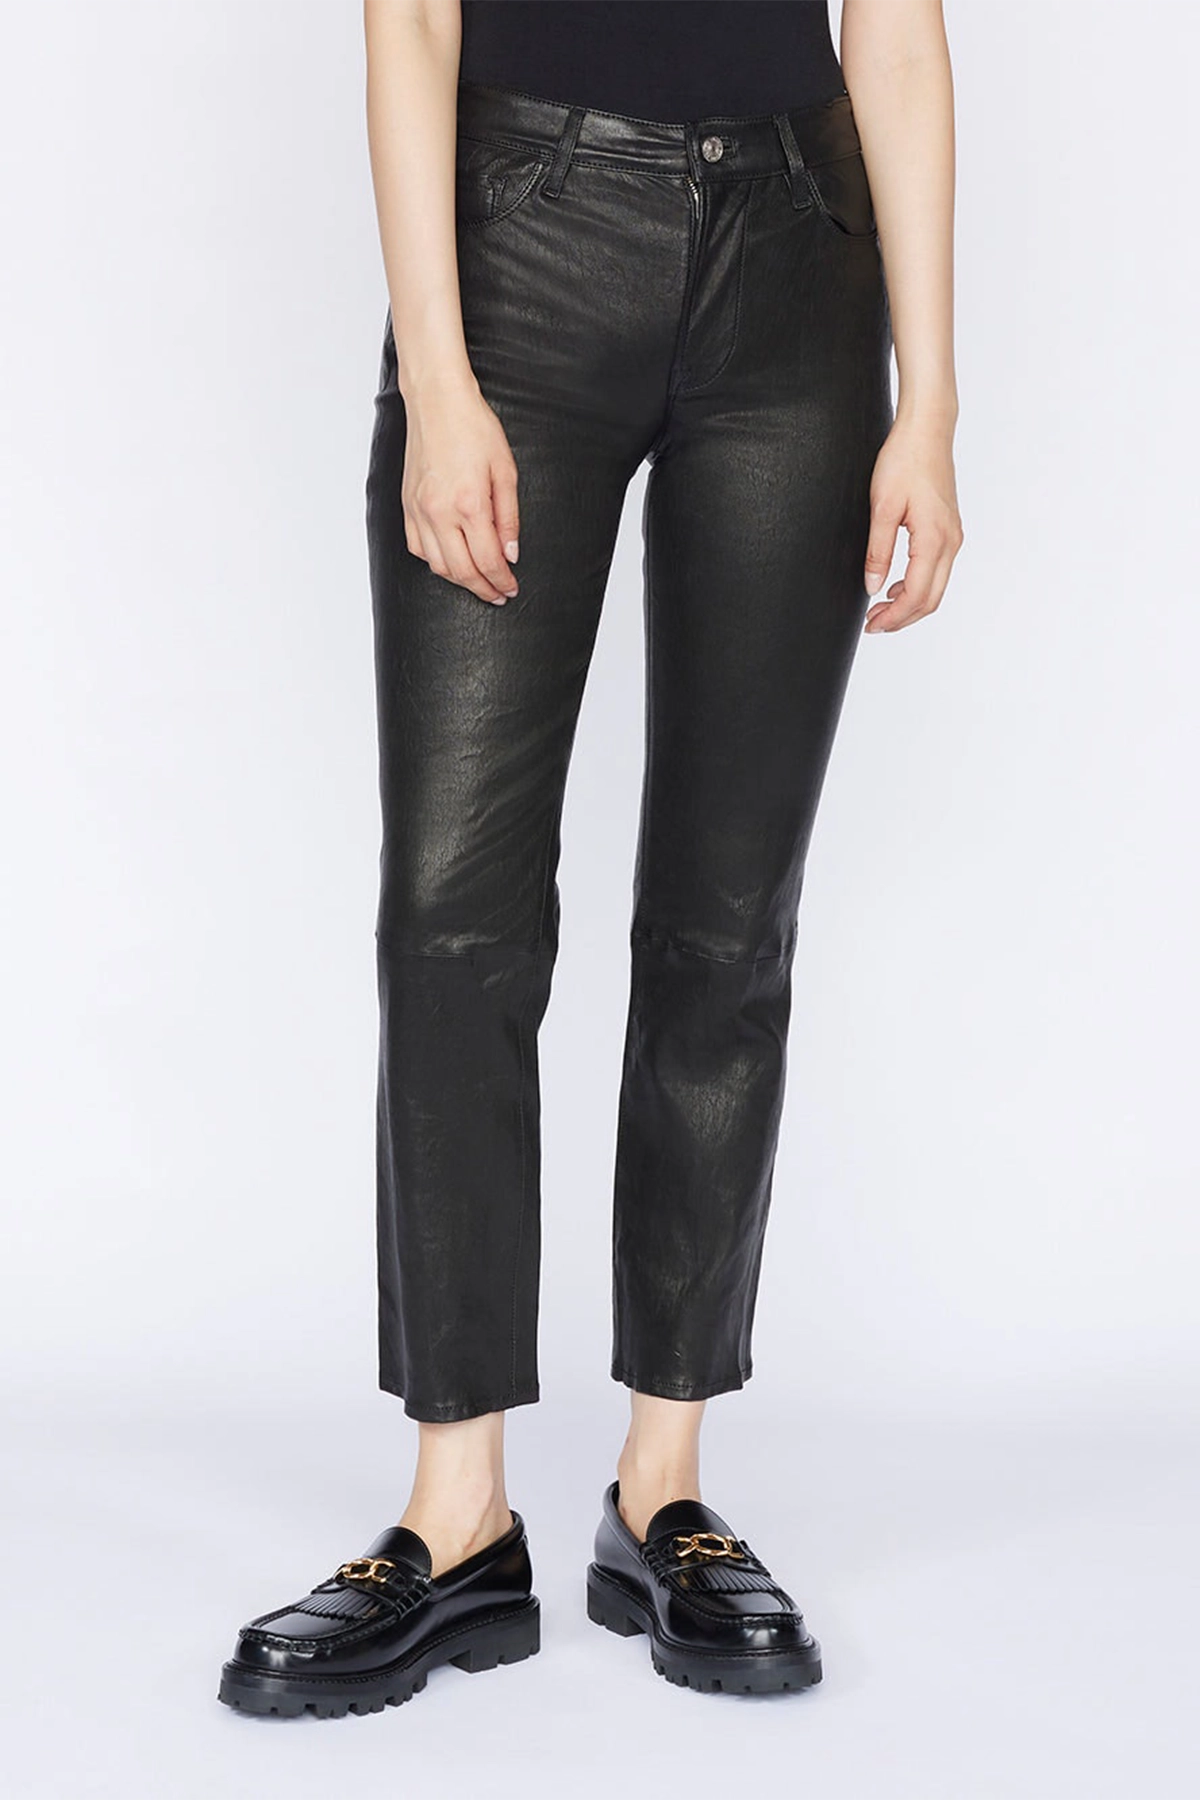 Frame Le High Straight Leather Pants